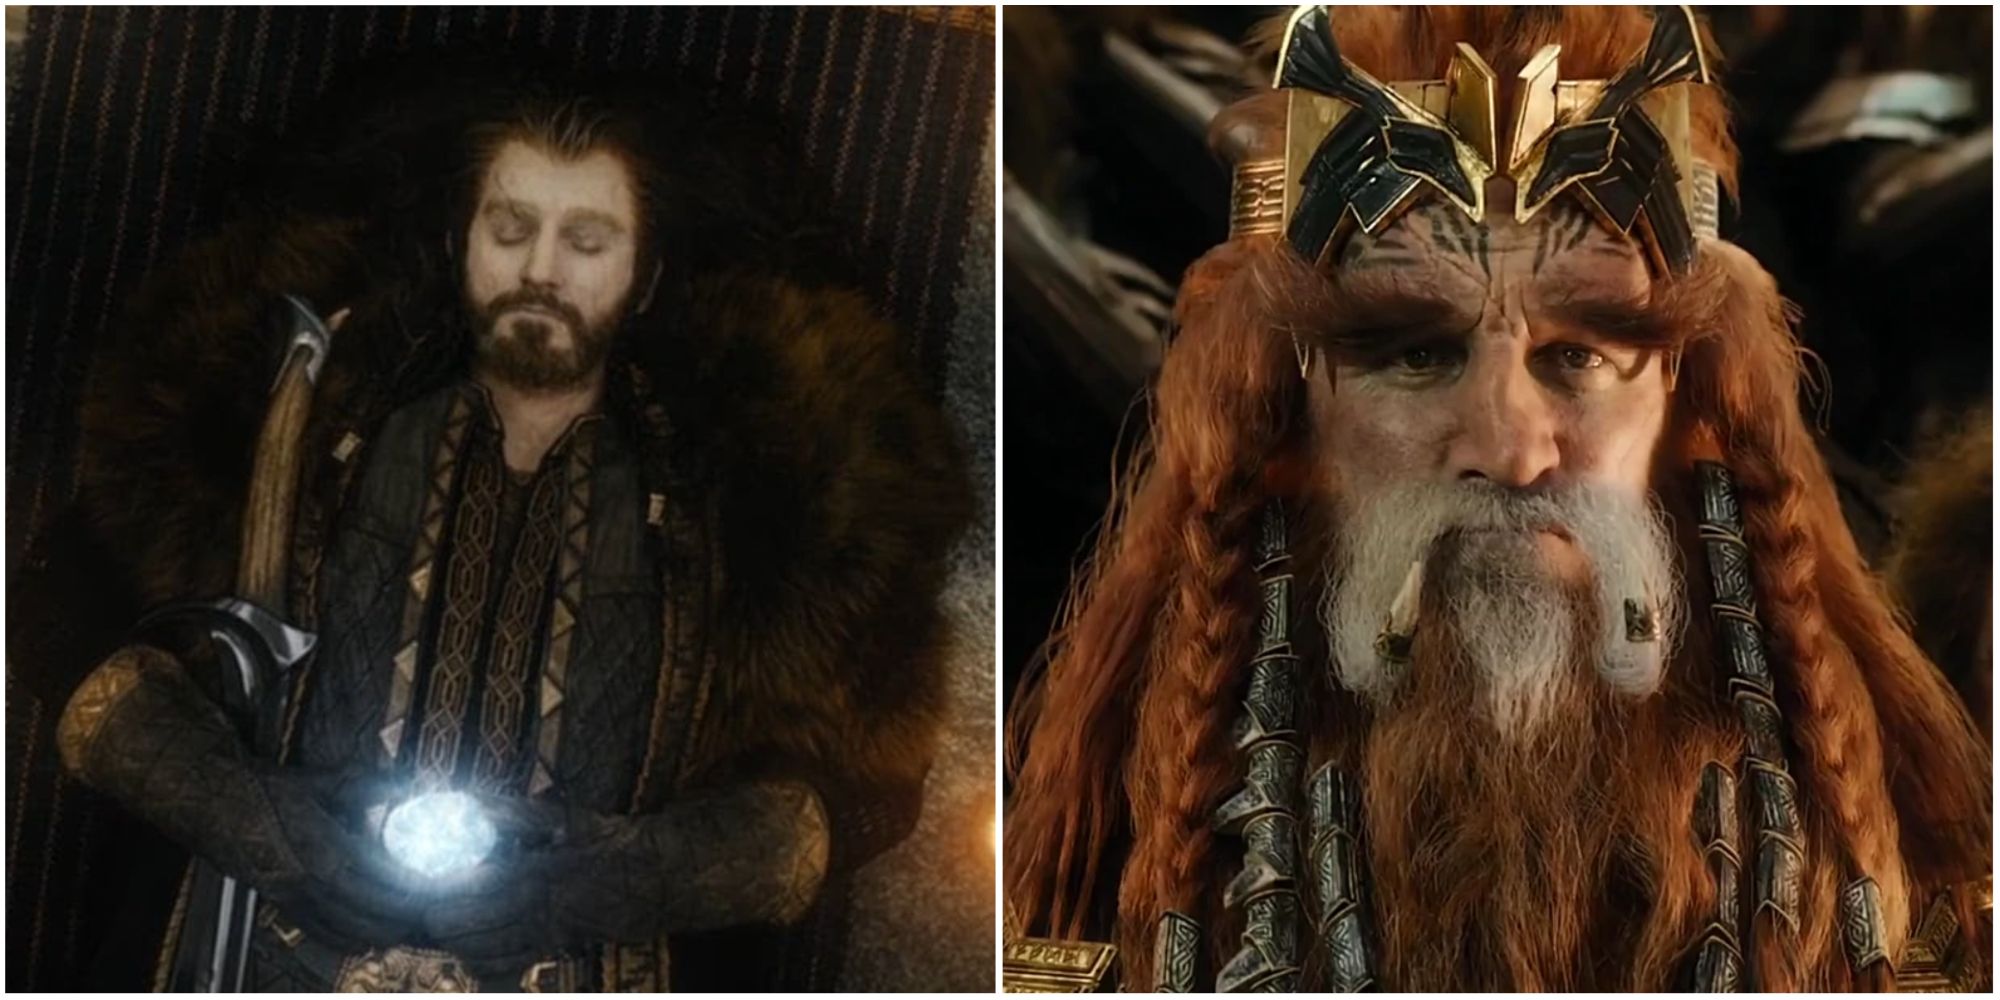 Thorin and Dain in The Hobbit: The Battle of the Five Armies